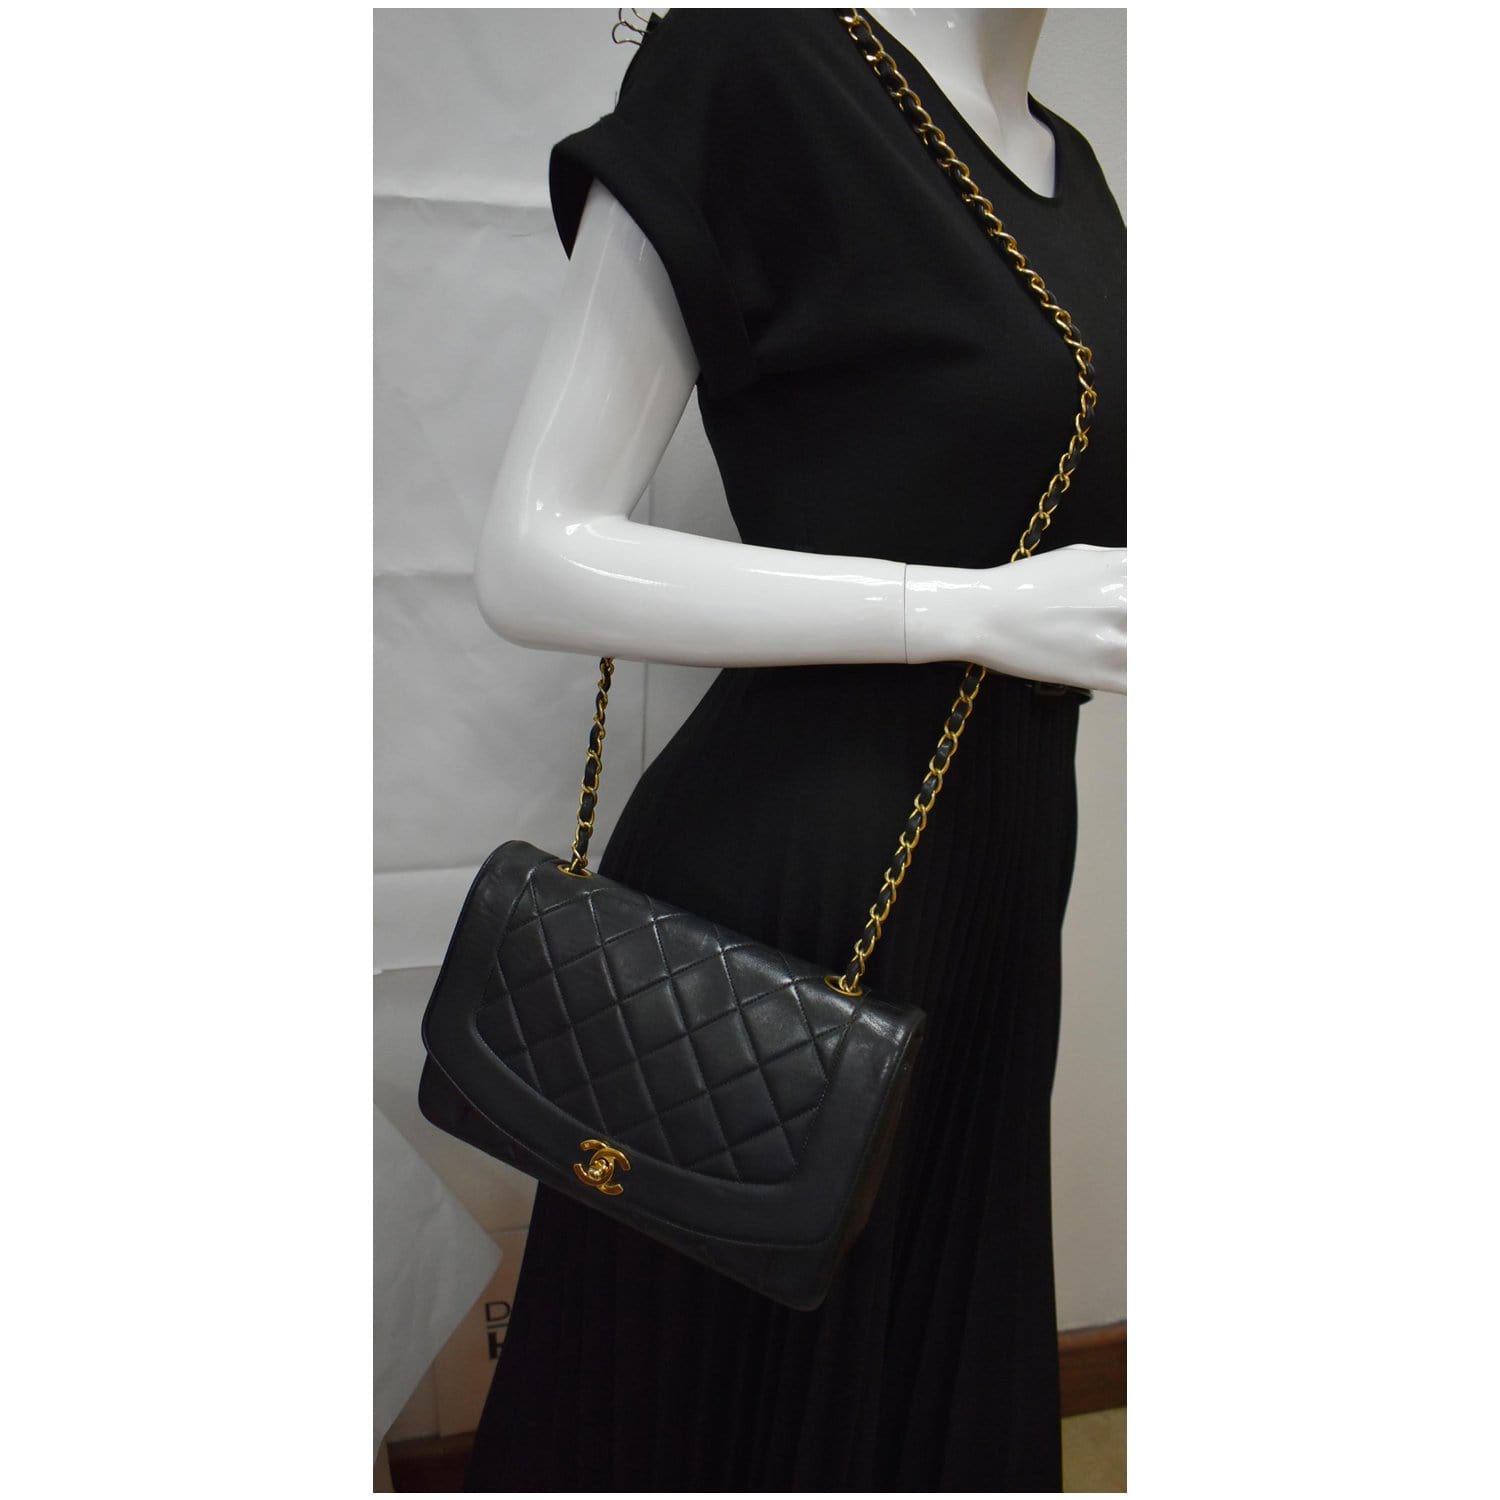 CHANEL, Bags, Chanel Diana Flap